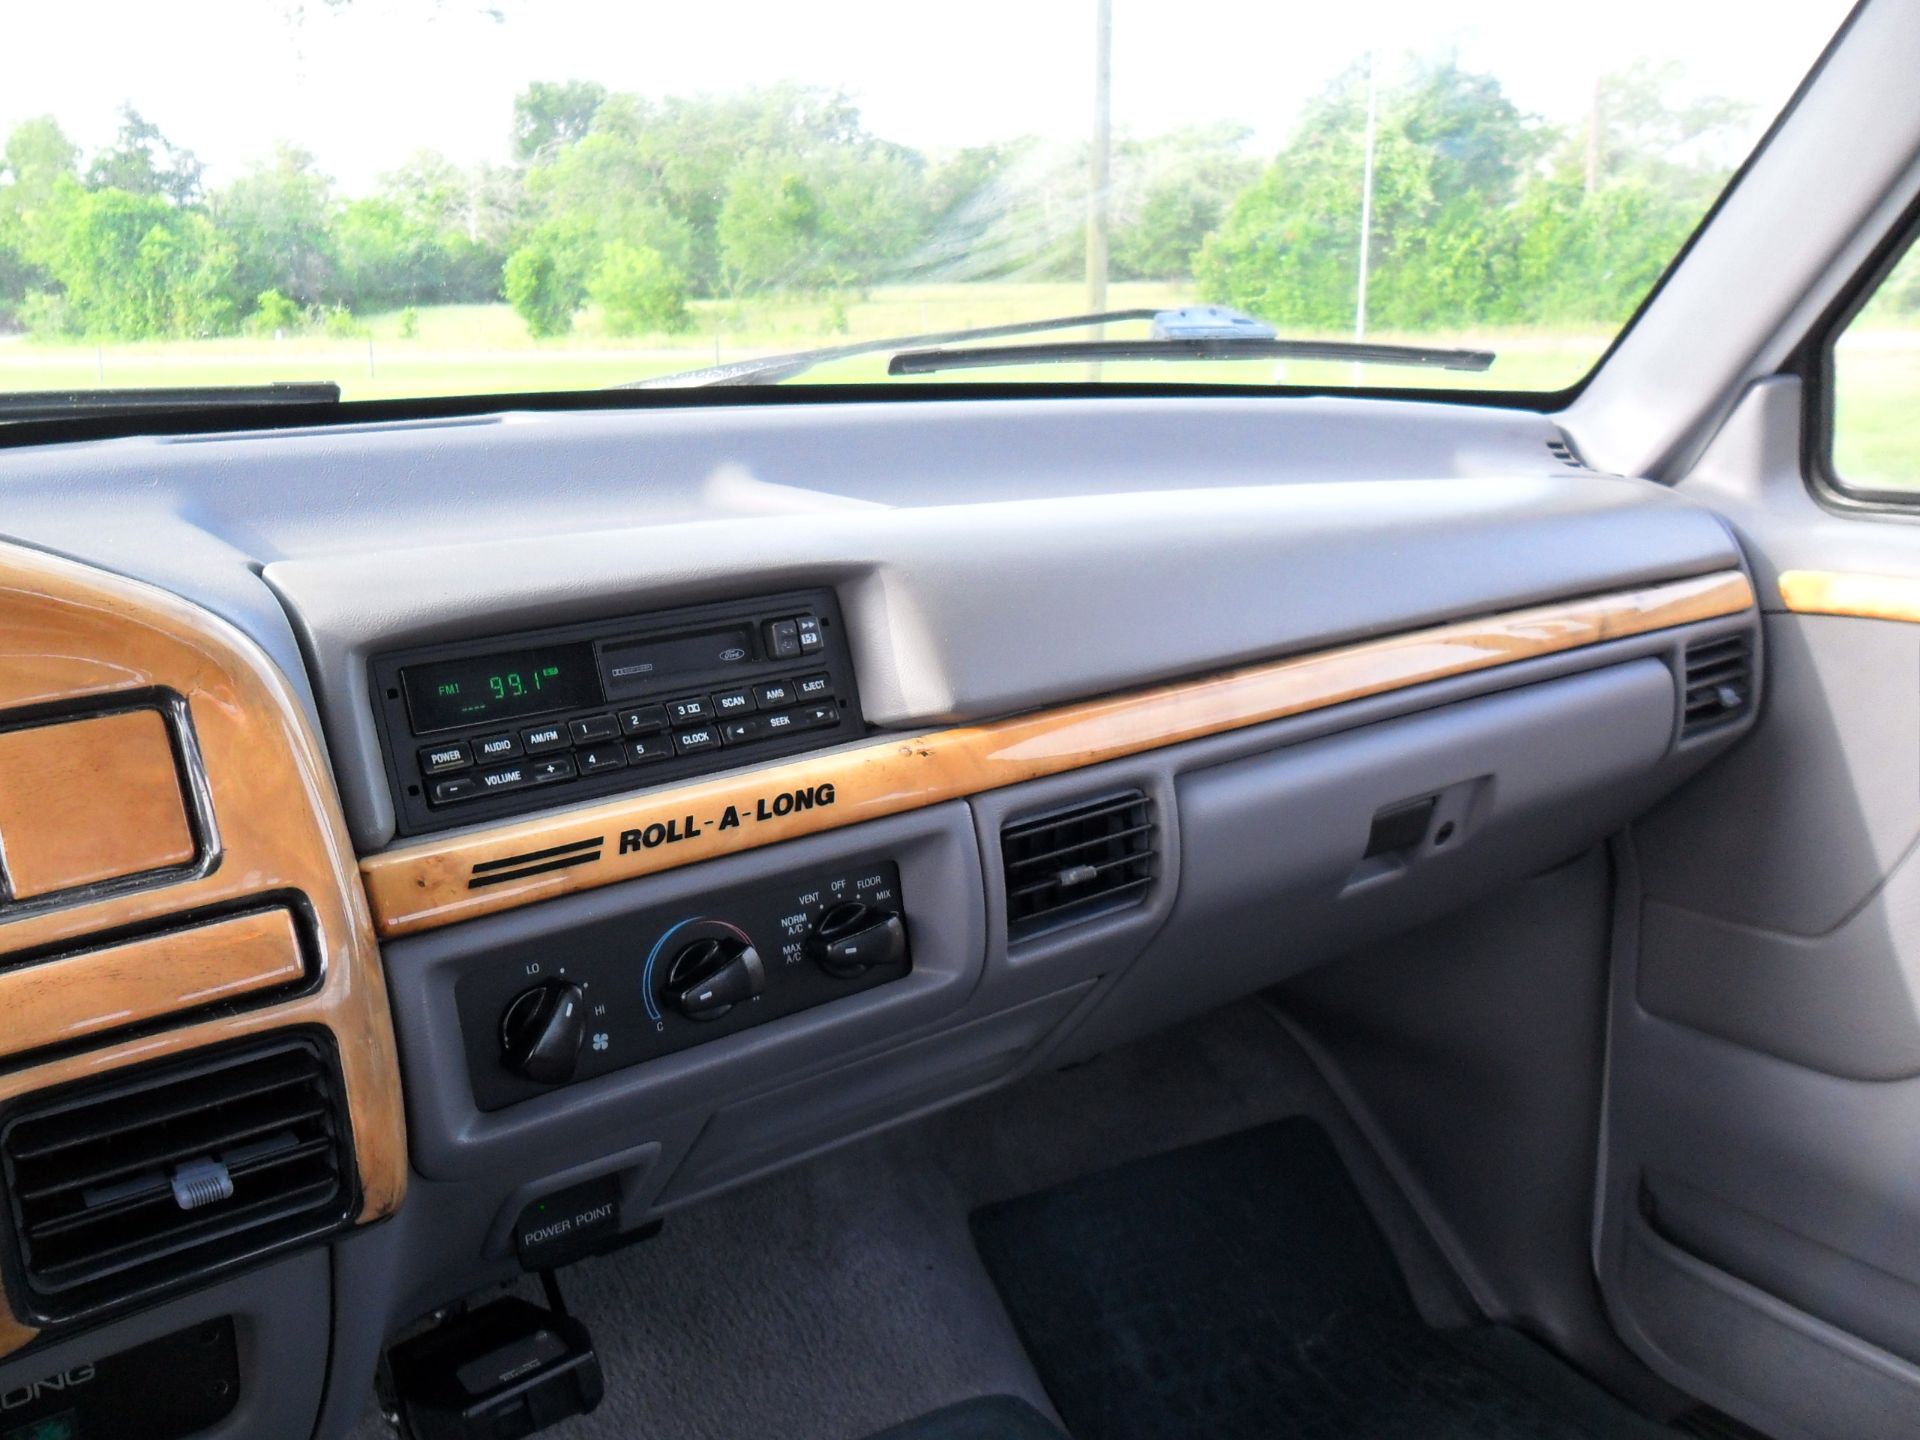 1995 Ford F250 Roll-A-Long Special Edition Pickup - Image 17 of 37